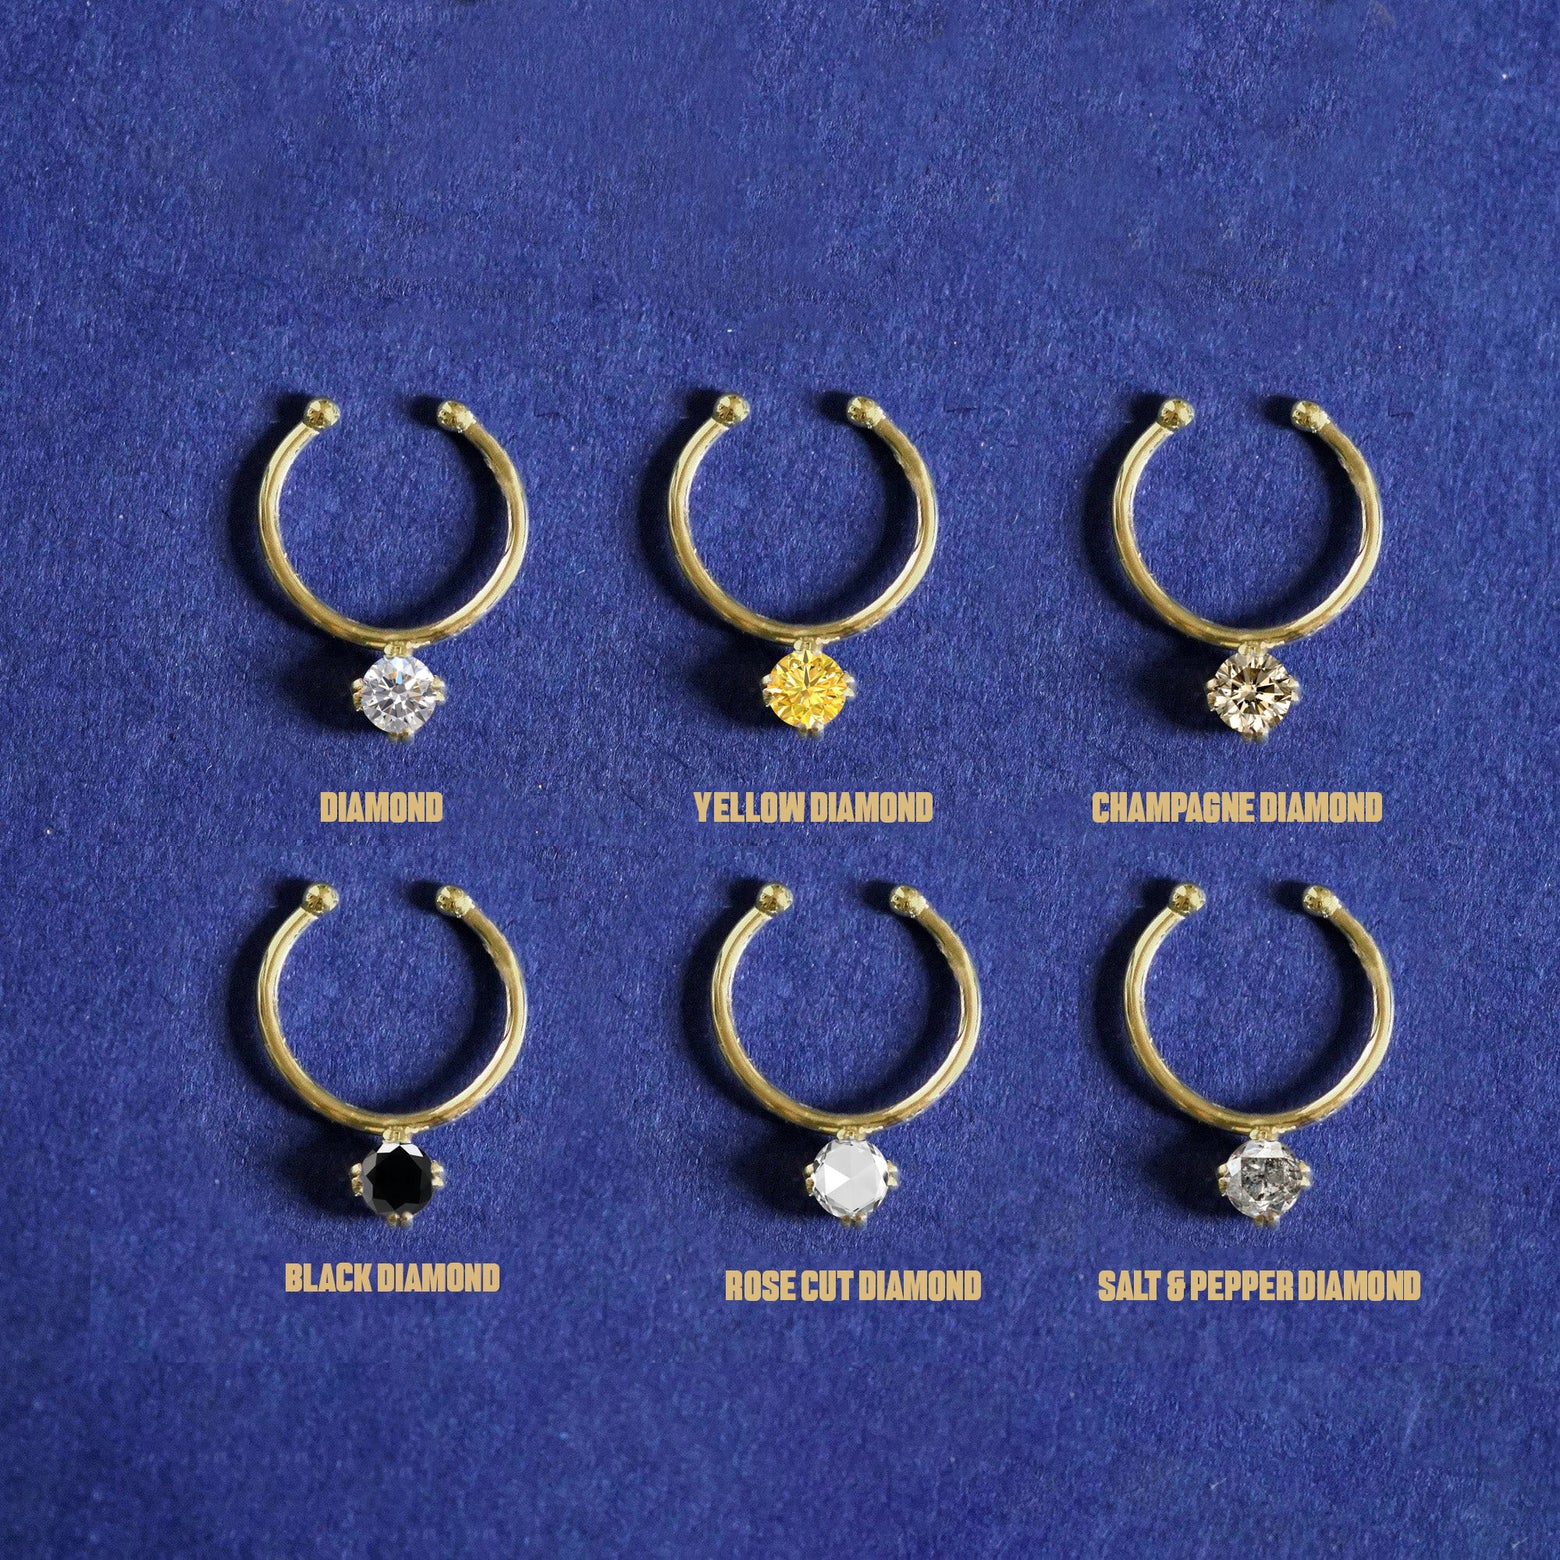 Six versions of the Diamond Septum shown in options of clear, yellow, champagne, black, rose cut, and salt and pepper diamond